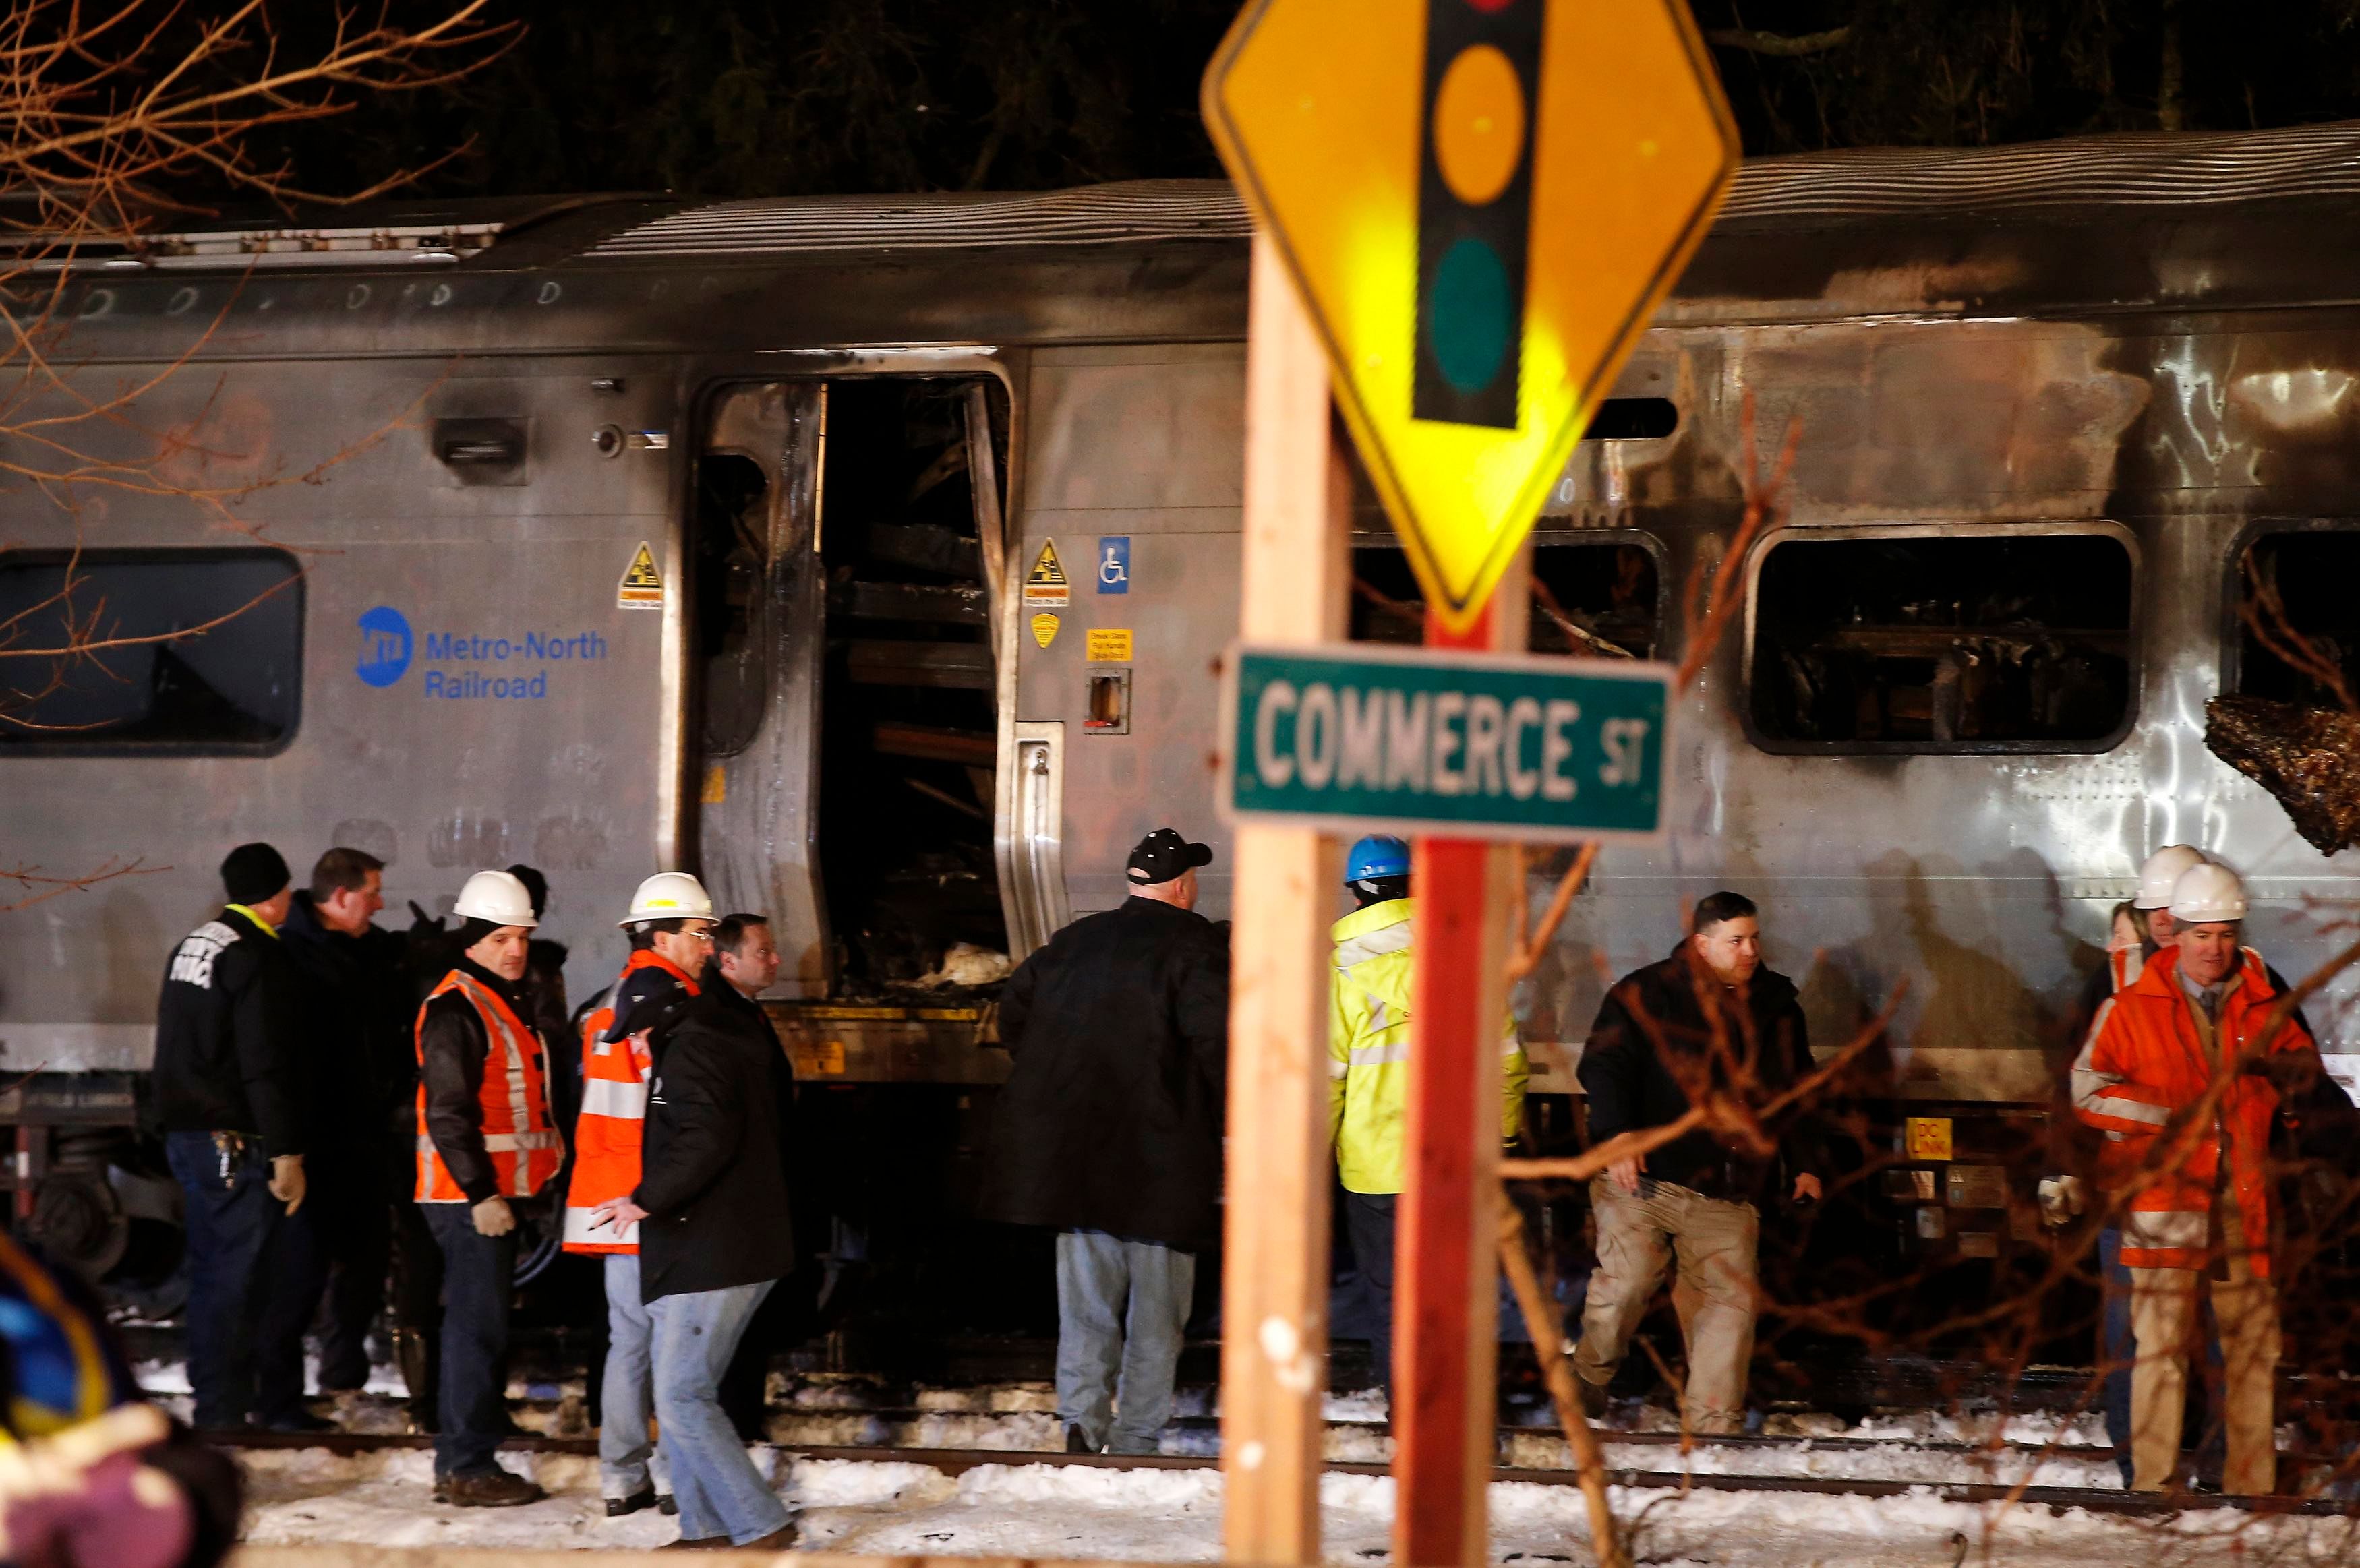 Emergency workers stand near a burned out Metropolitan Transportation Authority (MTA) Metro North Railroad commuter train that hit at least one car near the town of Valhalla, New York, February 3, 2015. Photo: Reuters